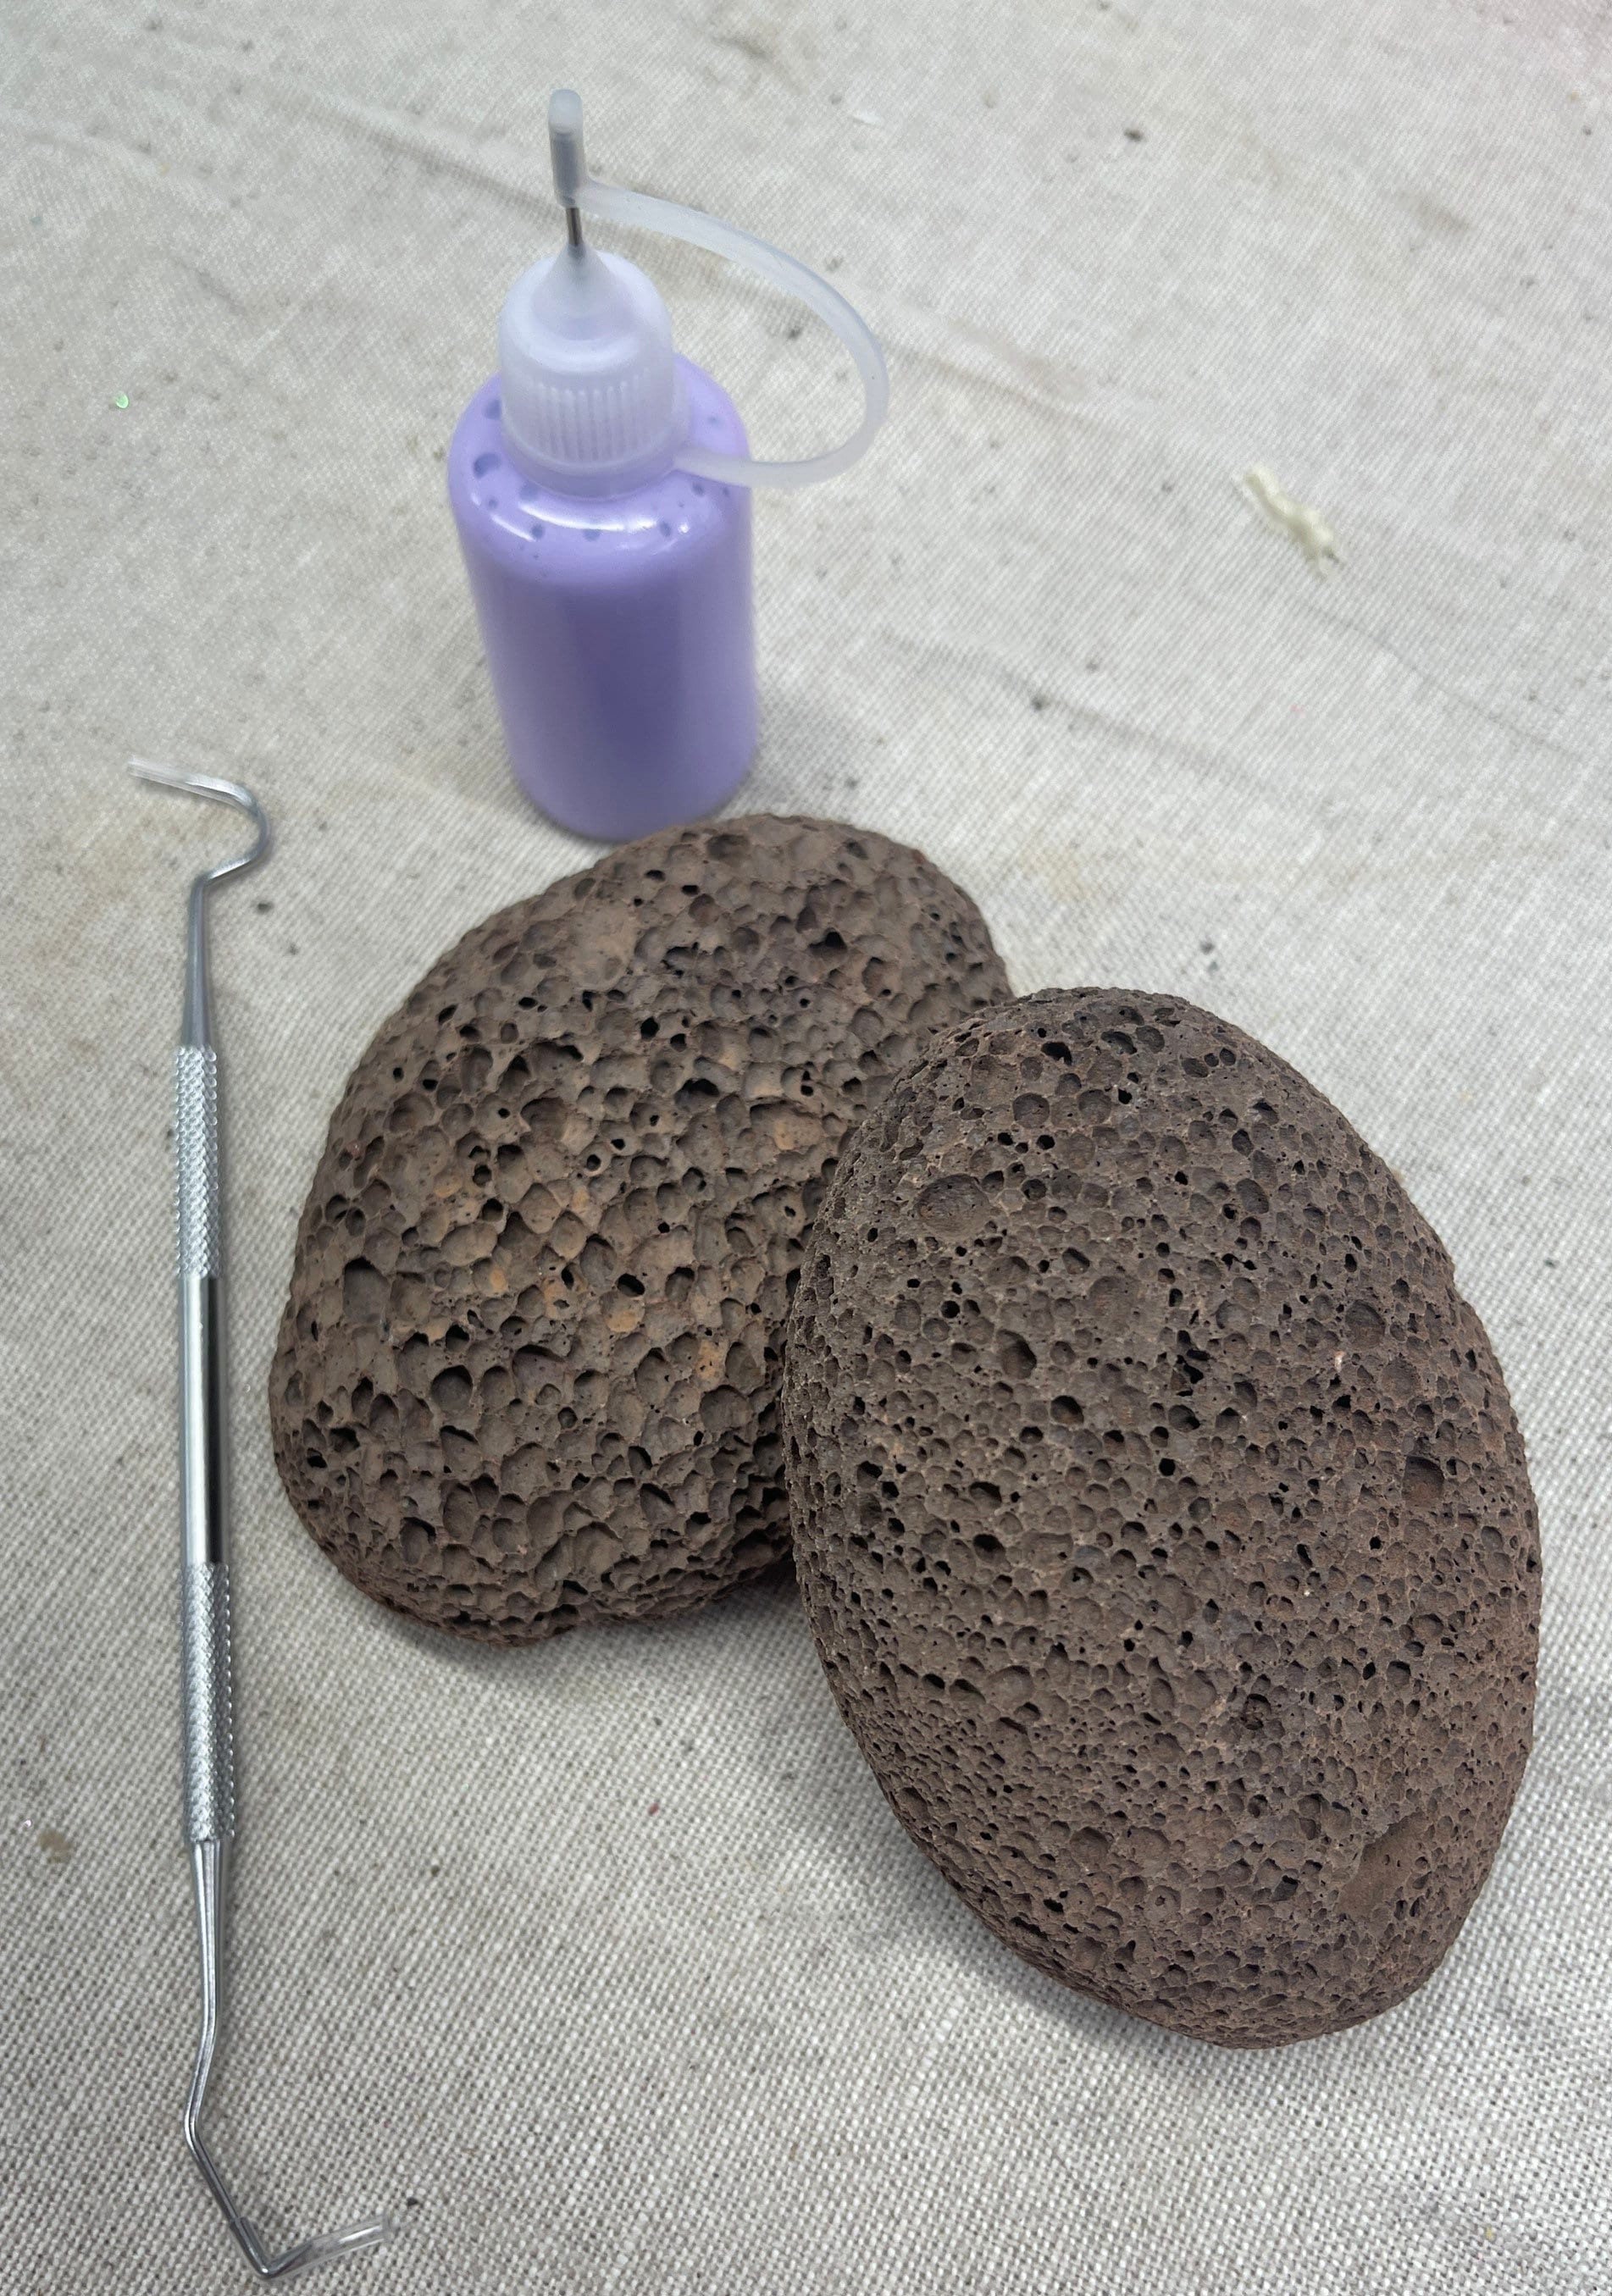 A Picky Pre-painted Pumice Stone Only – pickypumicestone